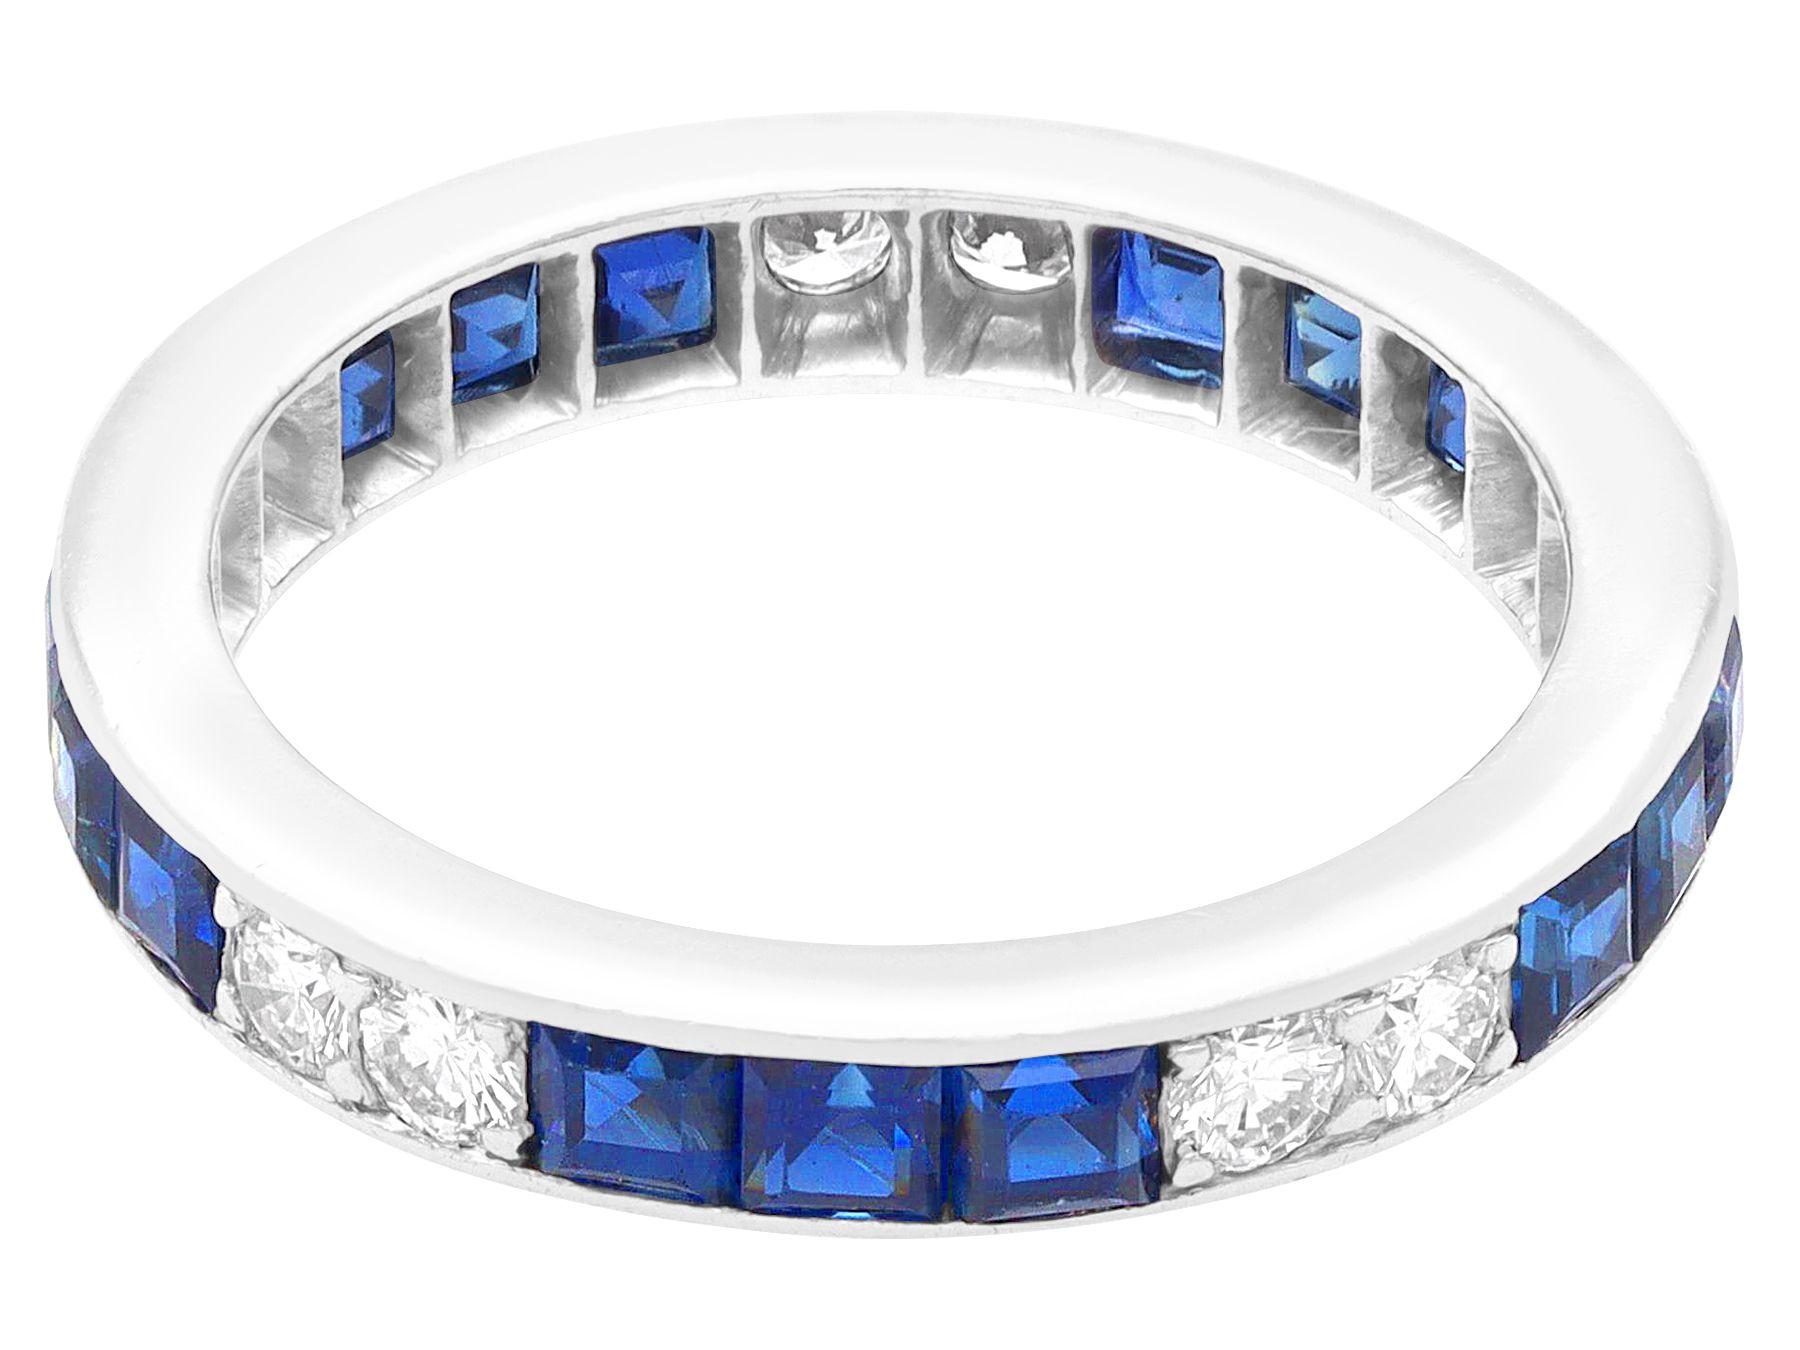 Vintage 1.45 Carat Sapphire and 0.72 Carat Diamond White Gold Full Eternity Ring In Excellent Condition For Sale In Jesmond, Newcastle Upon Tyne